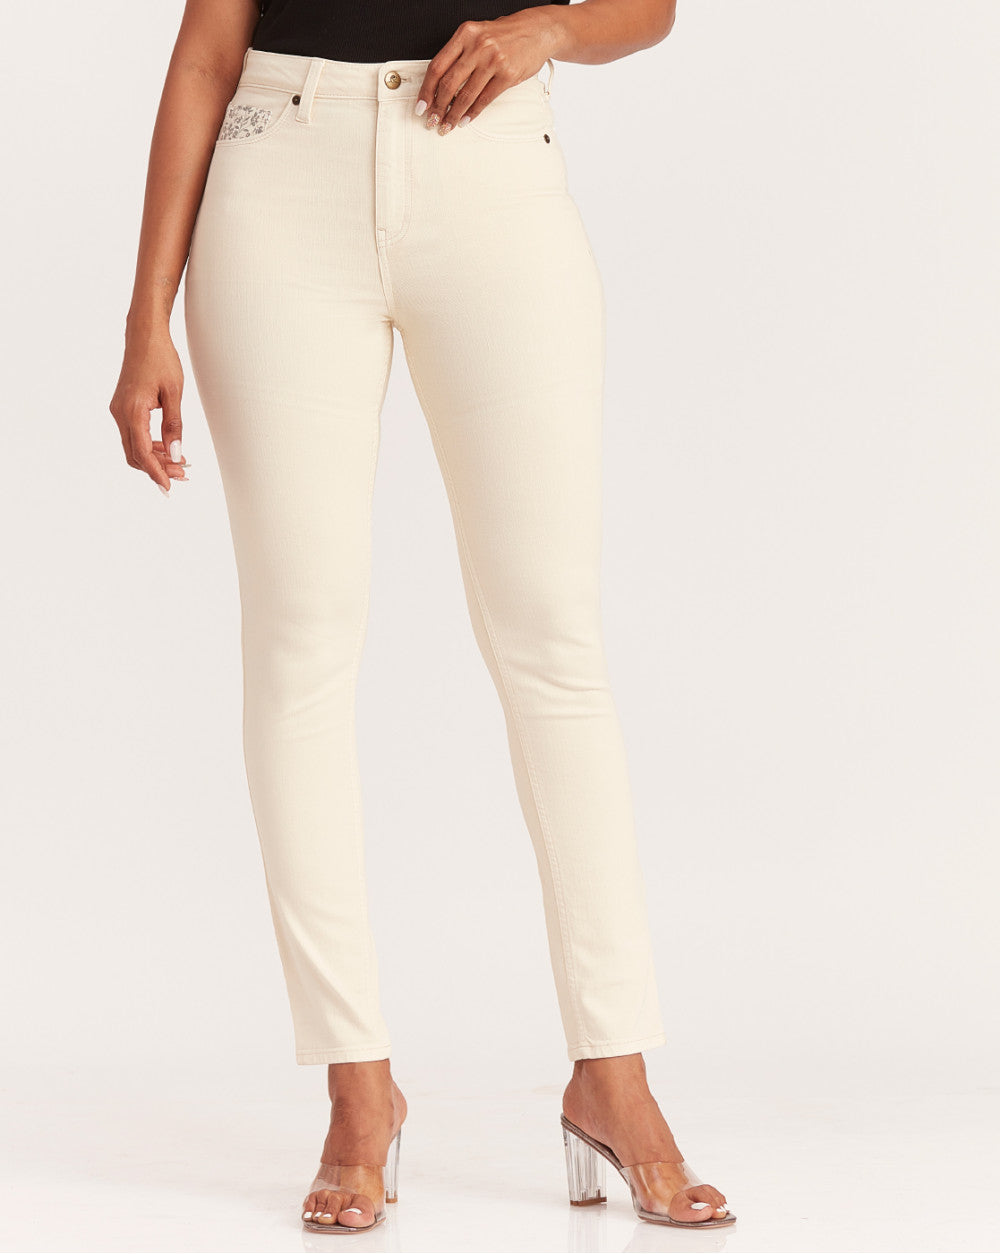 Skinny Fit High Waist Colored Jeans - Cream